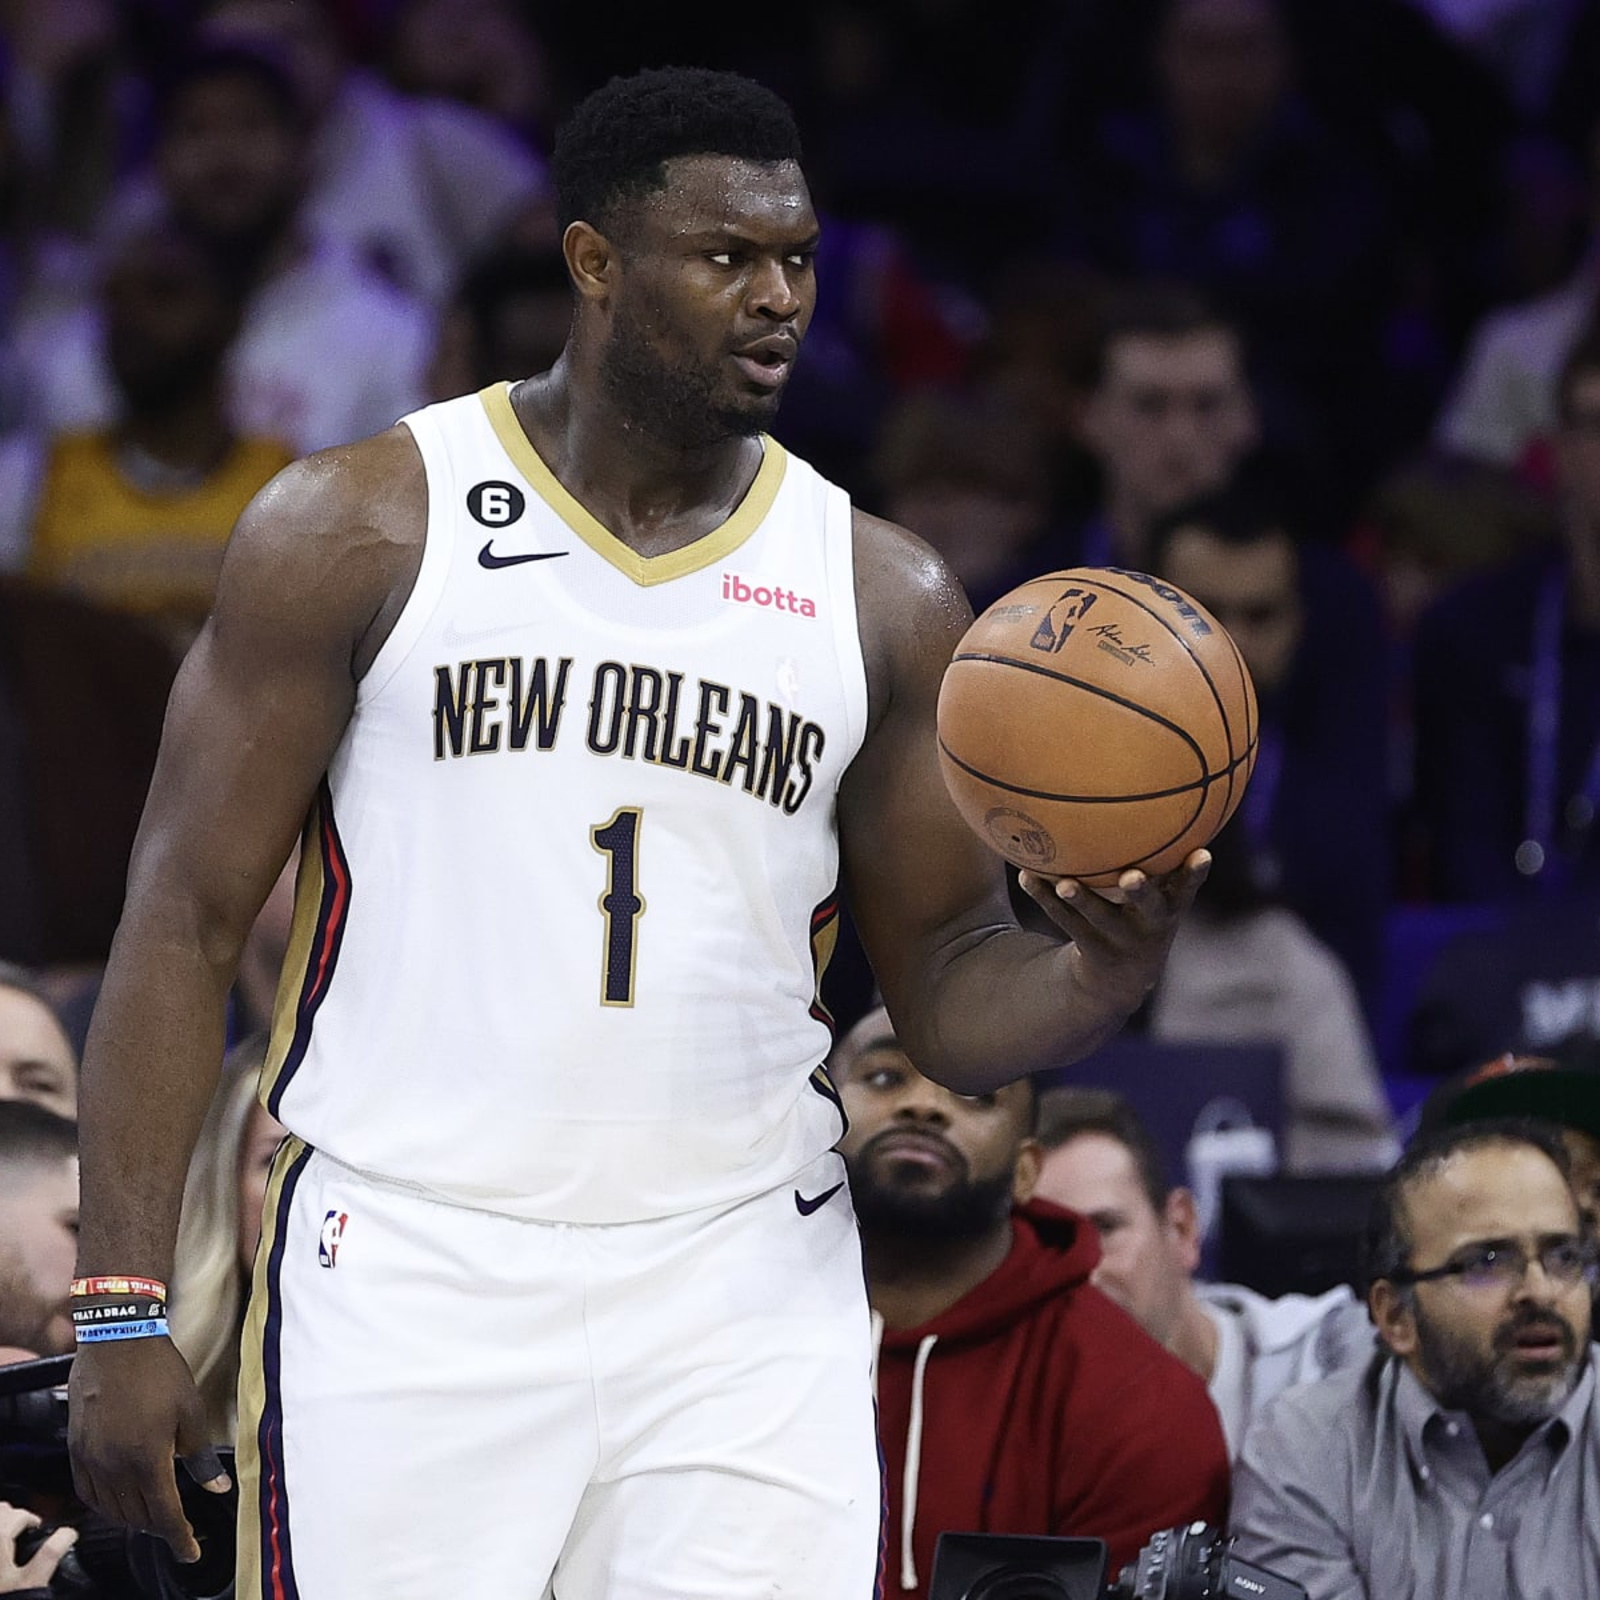 Should the New Orleans Pelicans move on from Zion Williamson?